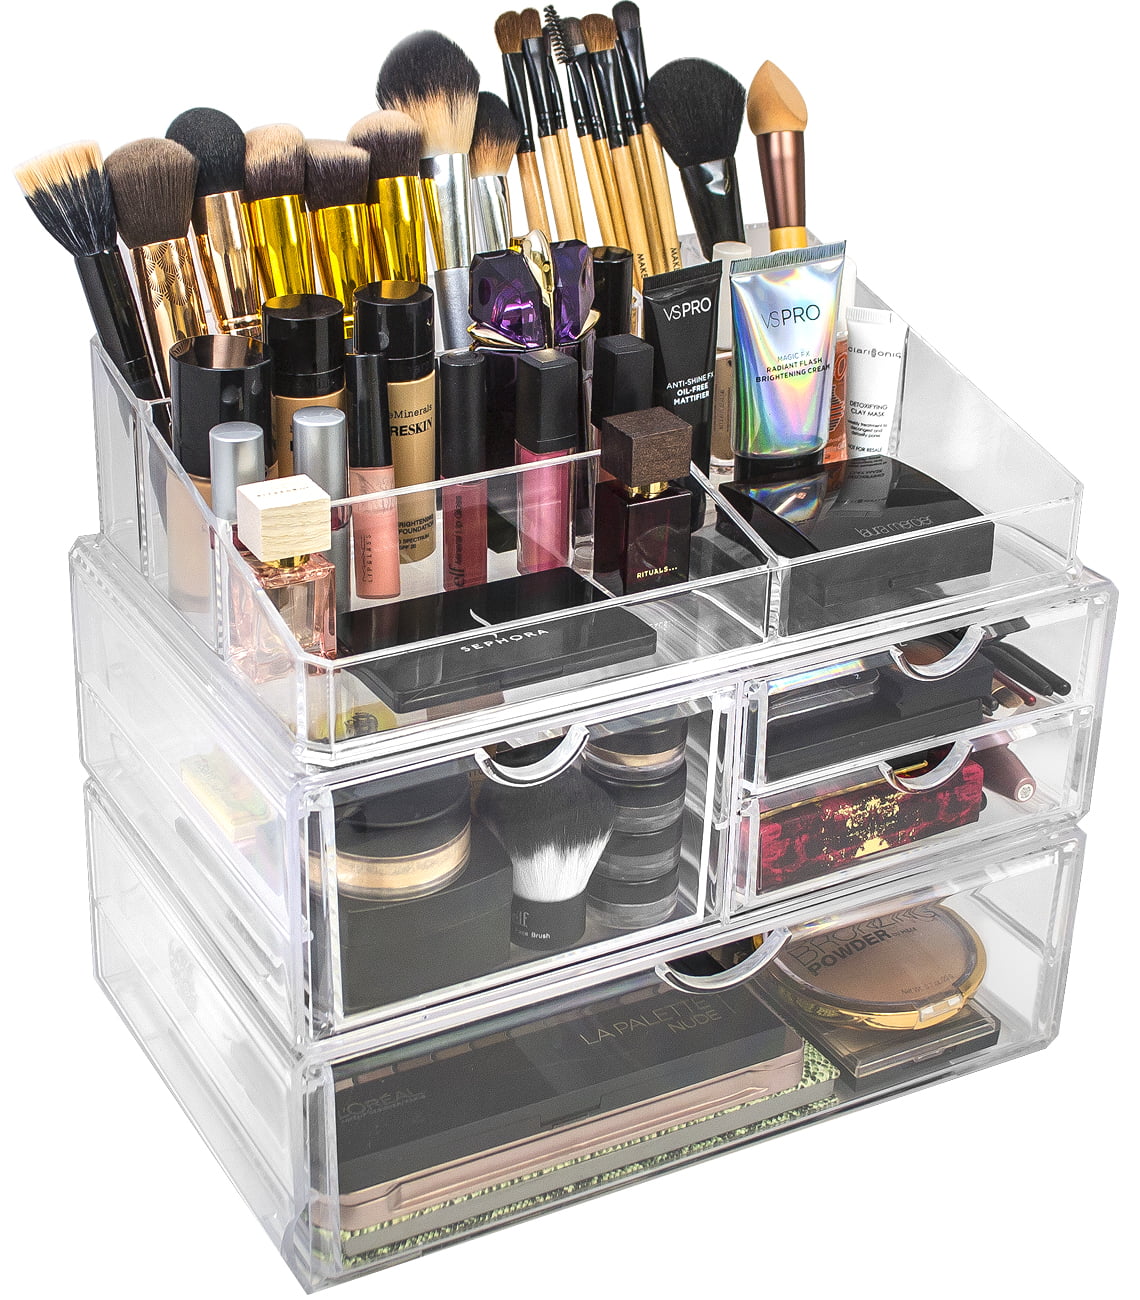 Mantello Acrylic Makeup Pallet Organizer - 7-Section Divided Eyeshadow Palette Organizer - Cash Tray for Cash Stuffing - Easy to Clean - Clear Acryli